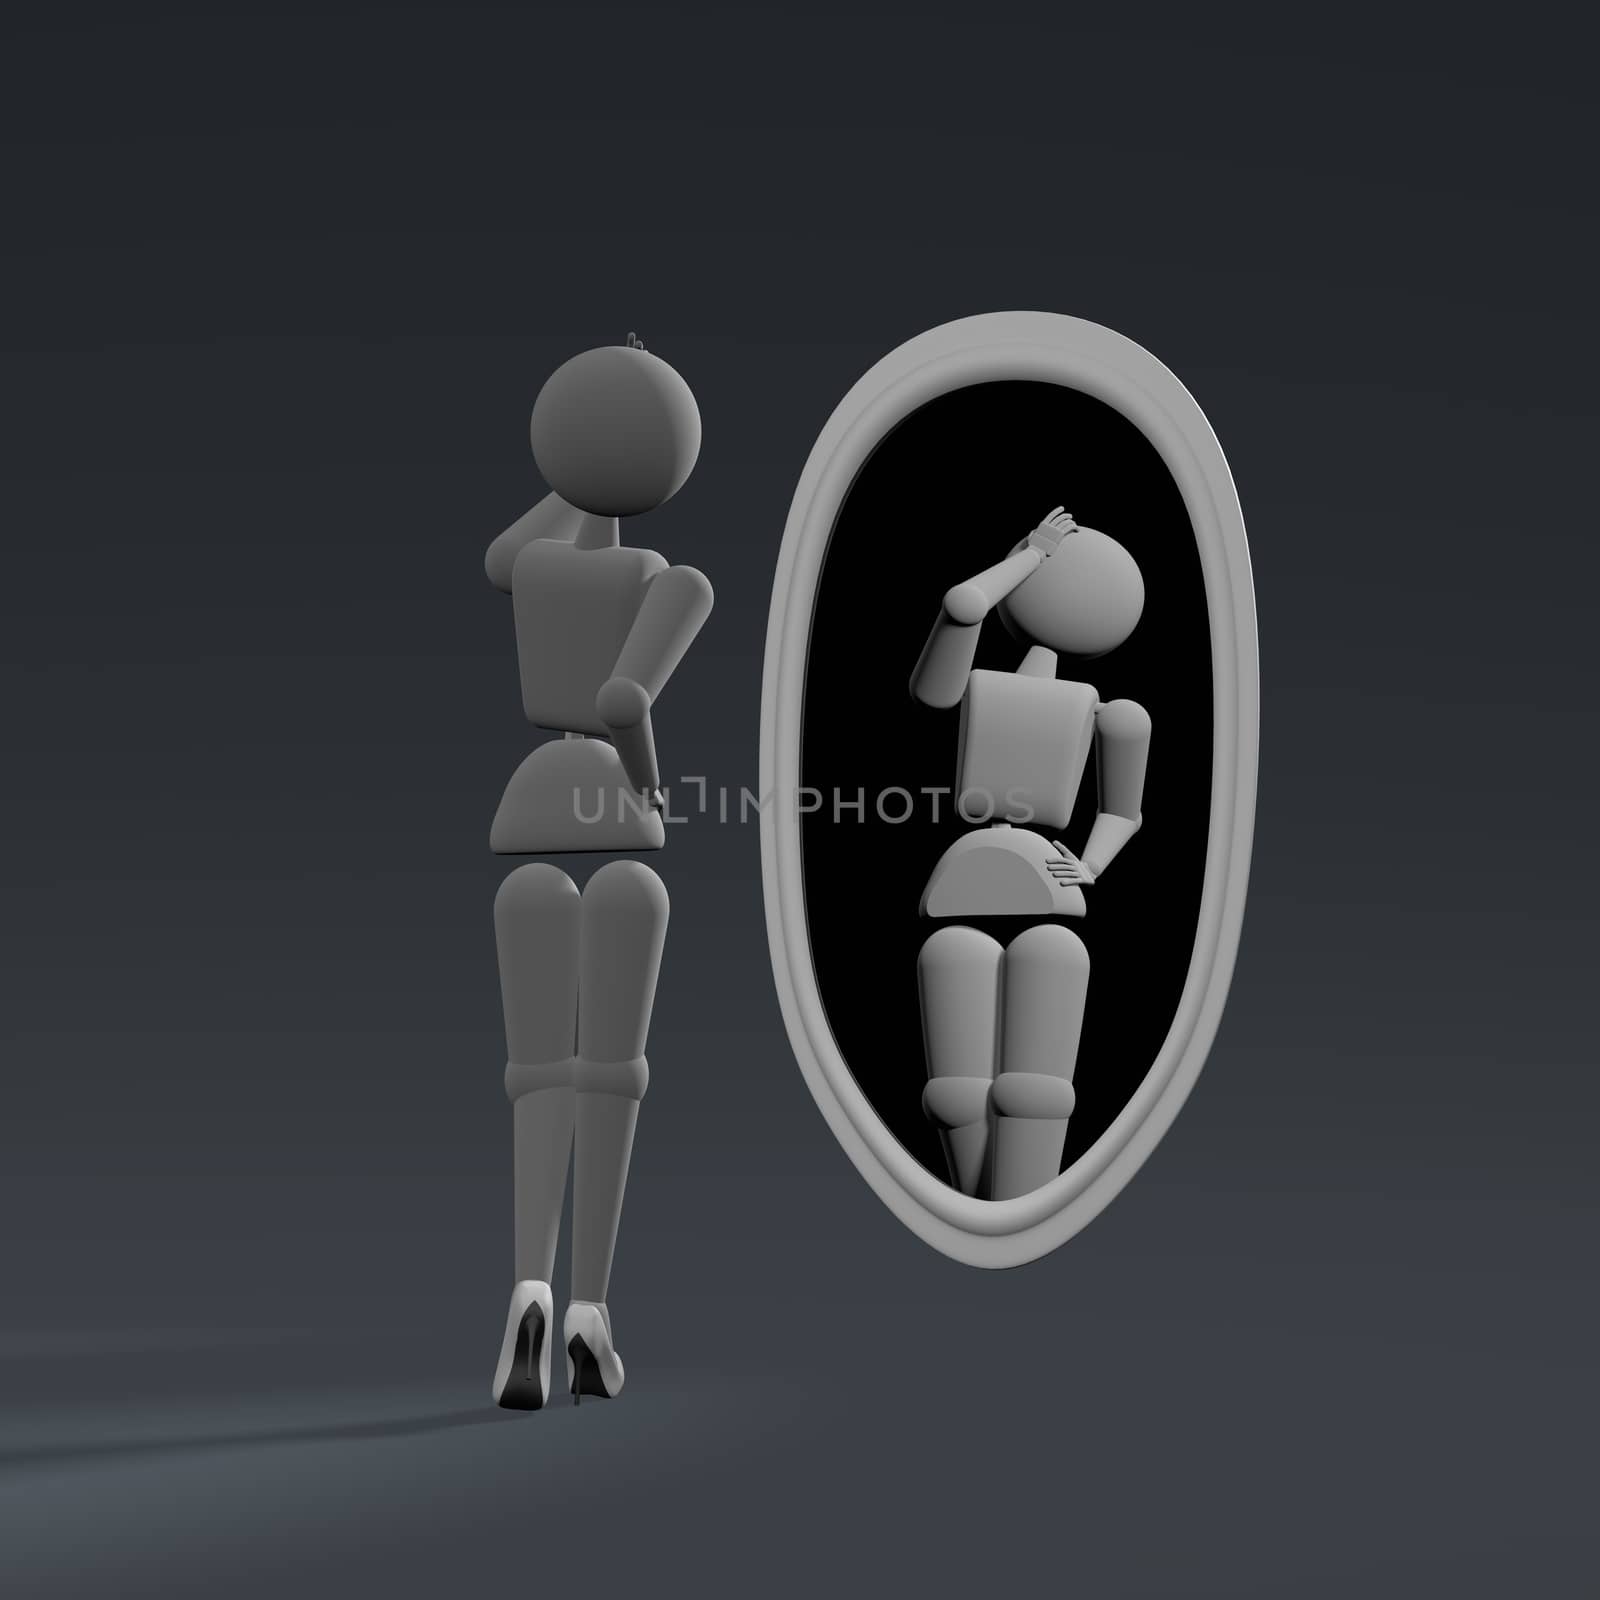 3D illustration. Puppet person, people. Elegant woman preens before a mirror. Background dark